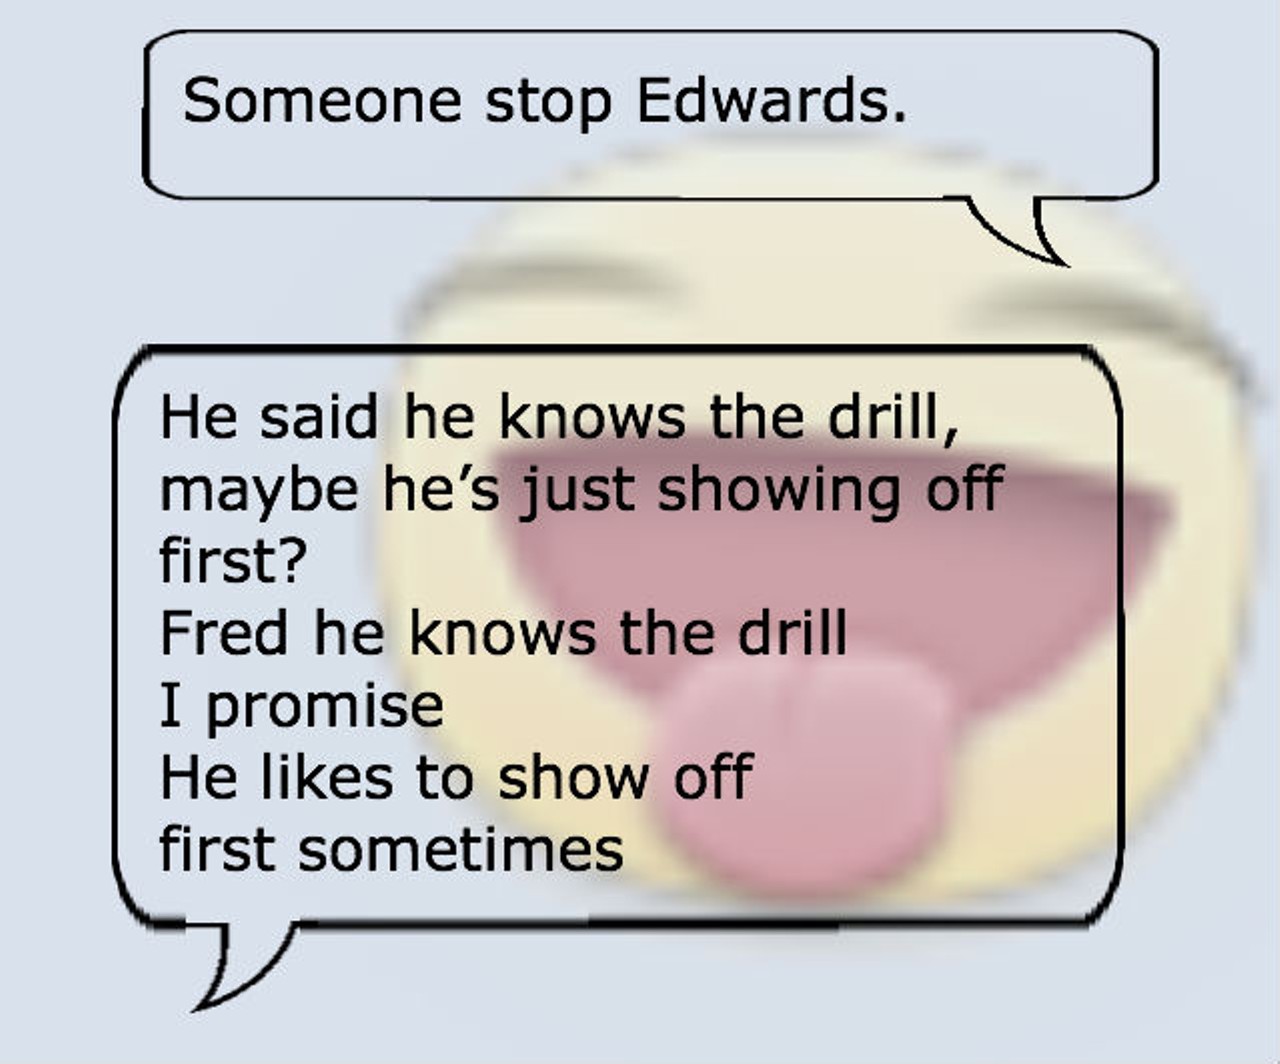 Fred Brummer text log from 9/11/12 5:26 pm
Brummer: Someone stop EdWards
He said he knows the drill. Maybe he&#146;s just showing off first?
Fred he knows the drill I promise
He likes to show off sometimes first
He told me he will vote for the continuance. He&#146;s trying (probably unnecessarily) to create a record
Full transcript